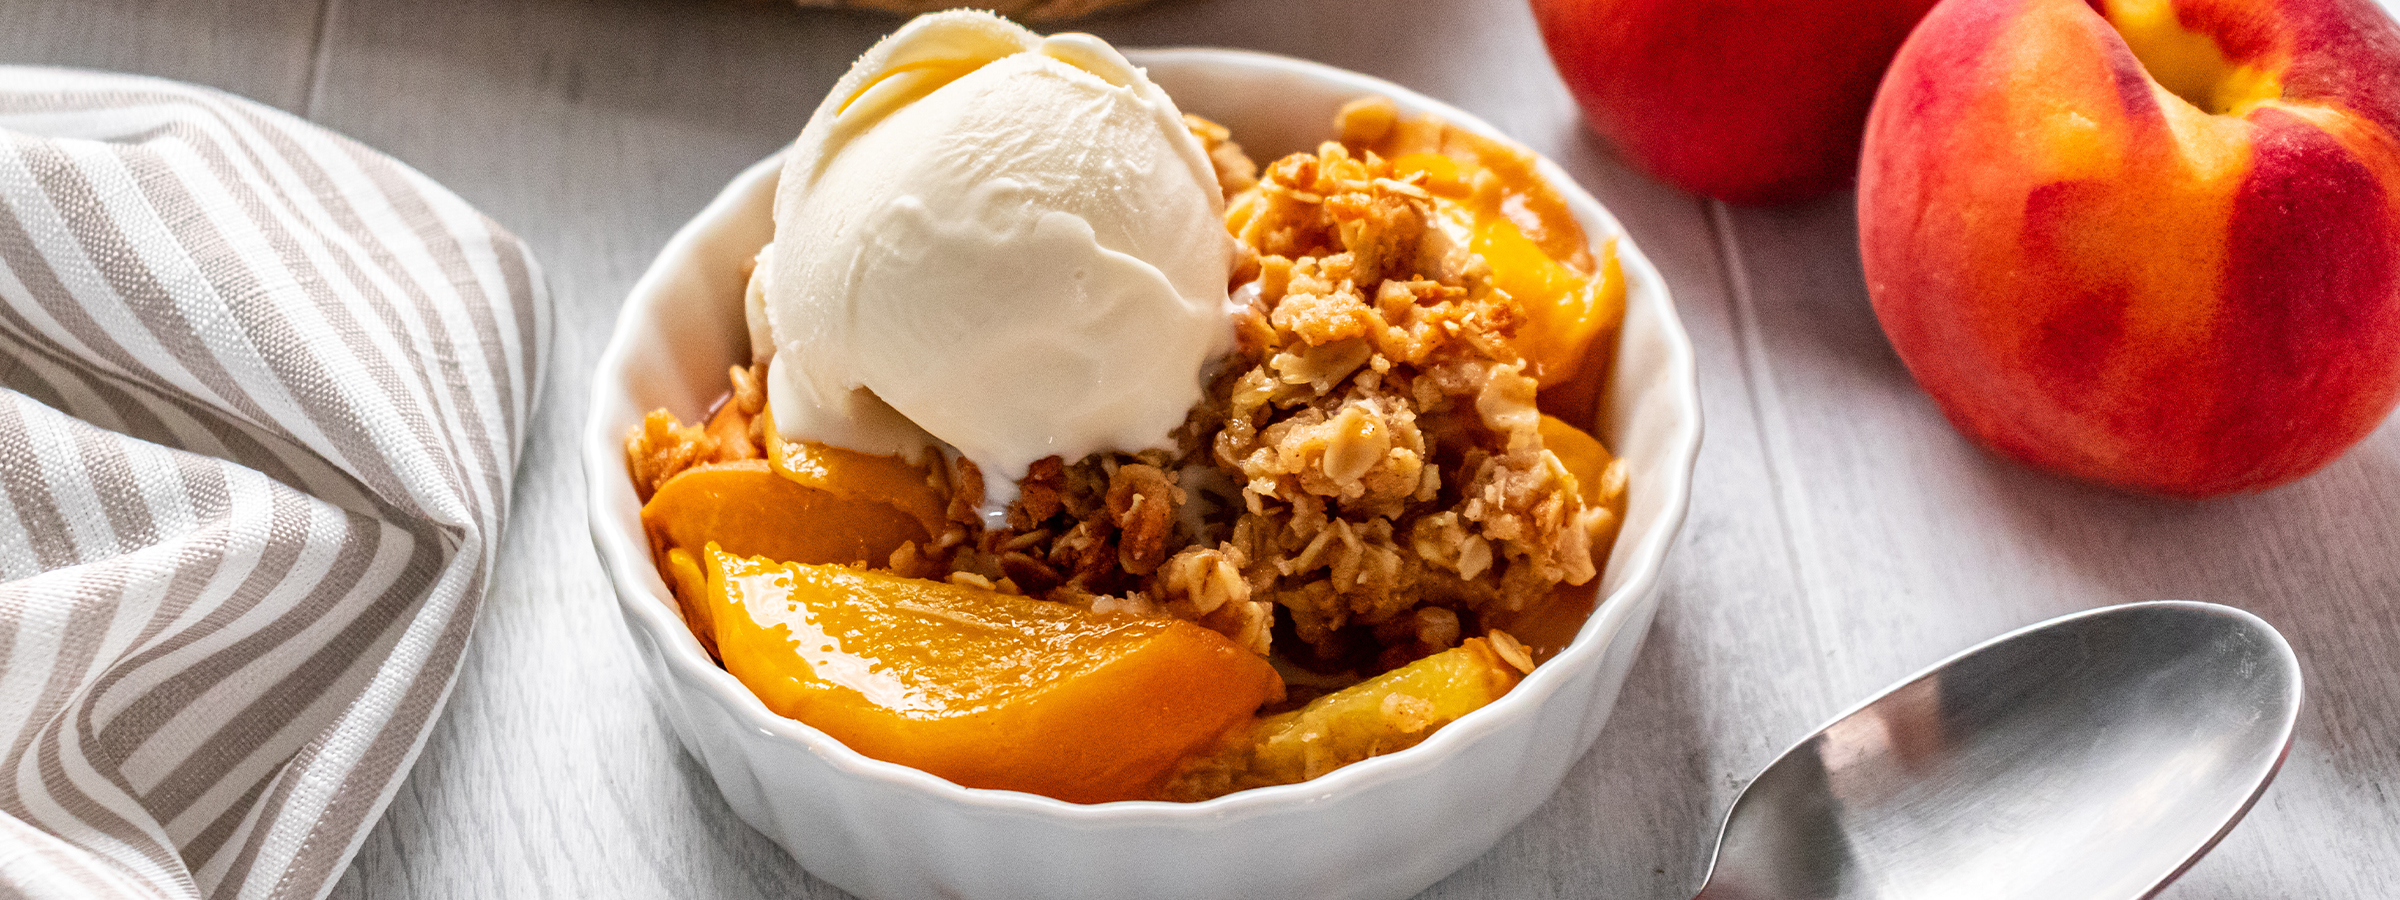 top view of bowl with peach crumble with an oat topping and a dollop of ice cream next to two peaches